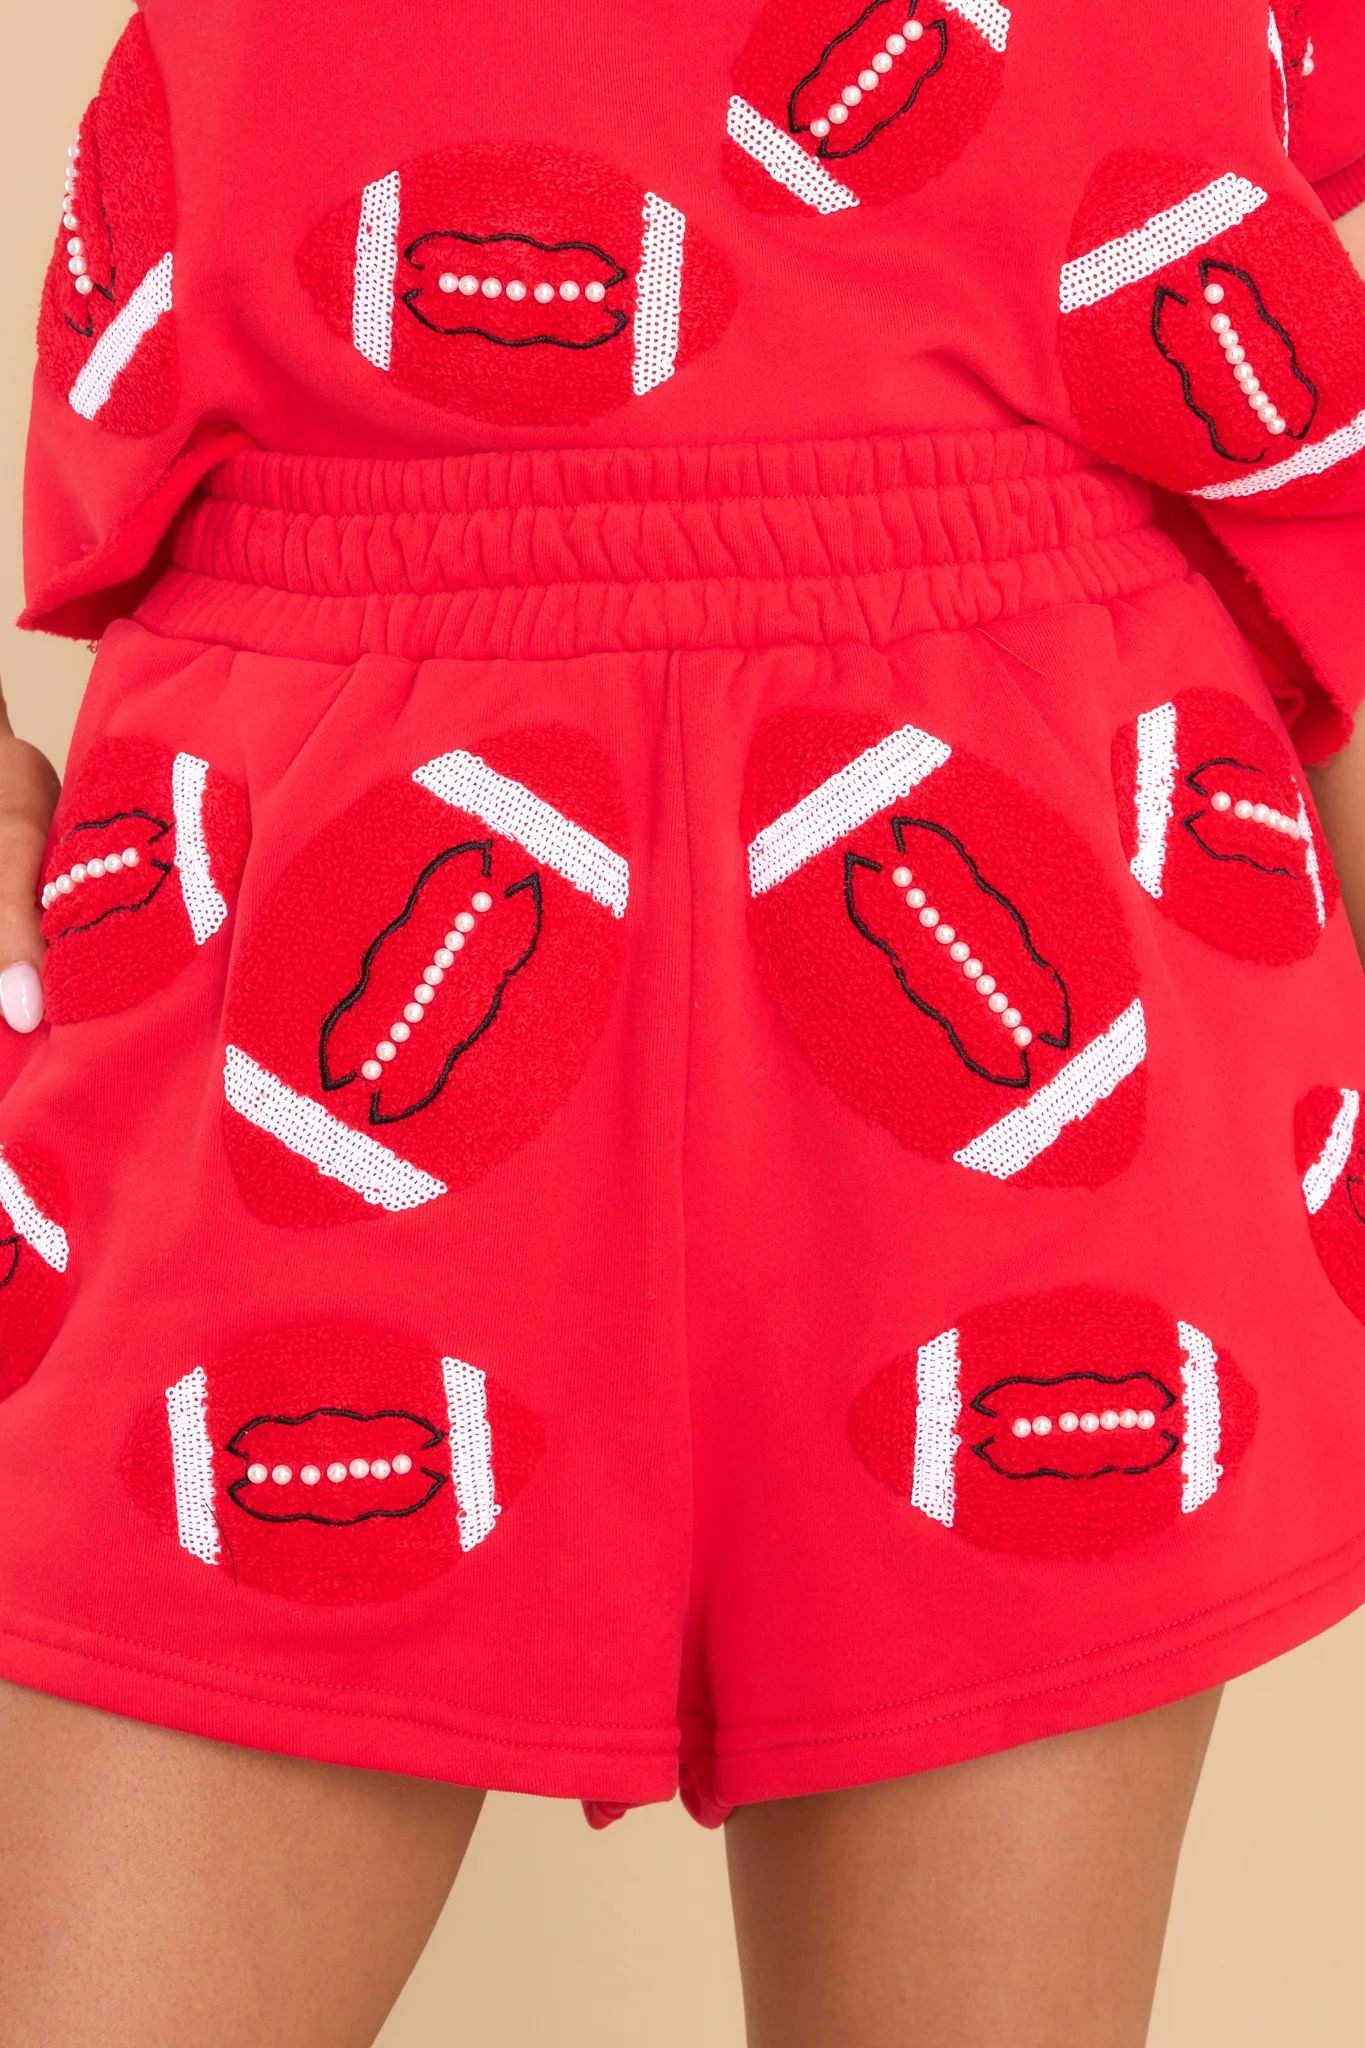 Red Fuzzy Football Shorts | Red Dress 